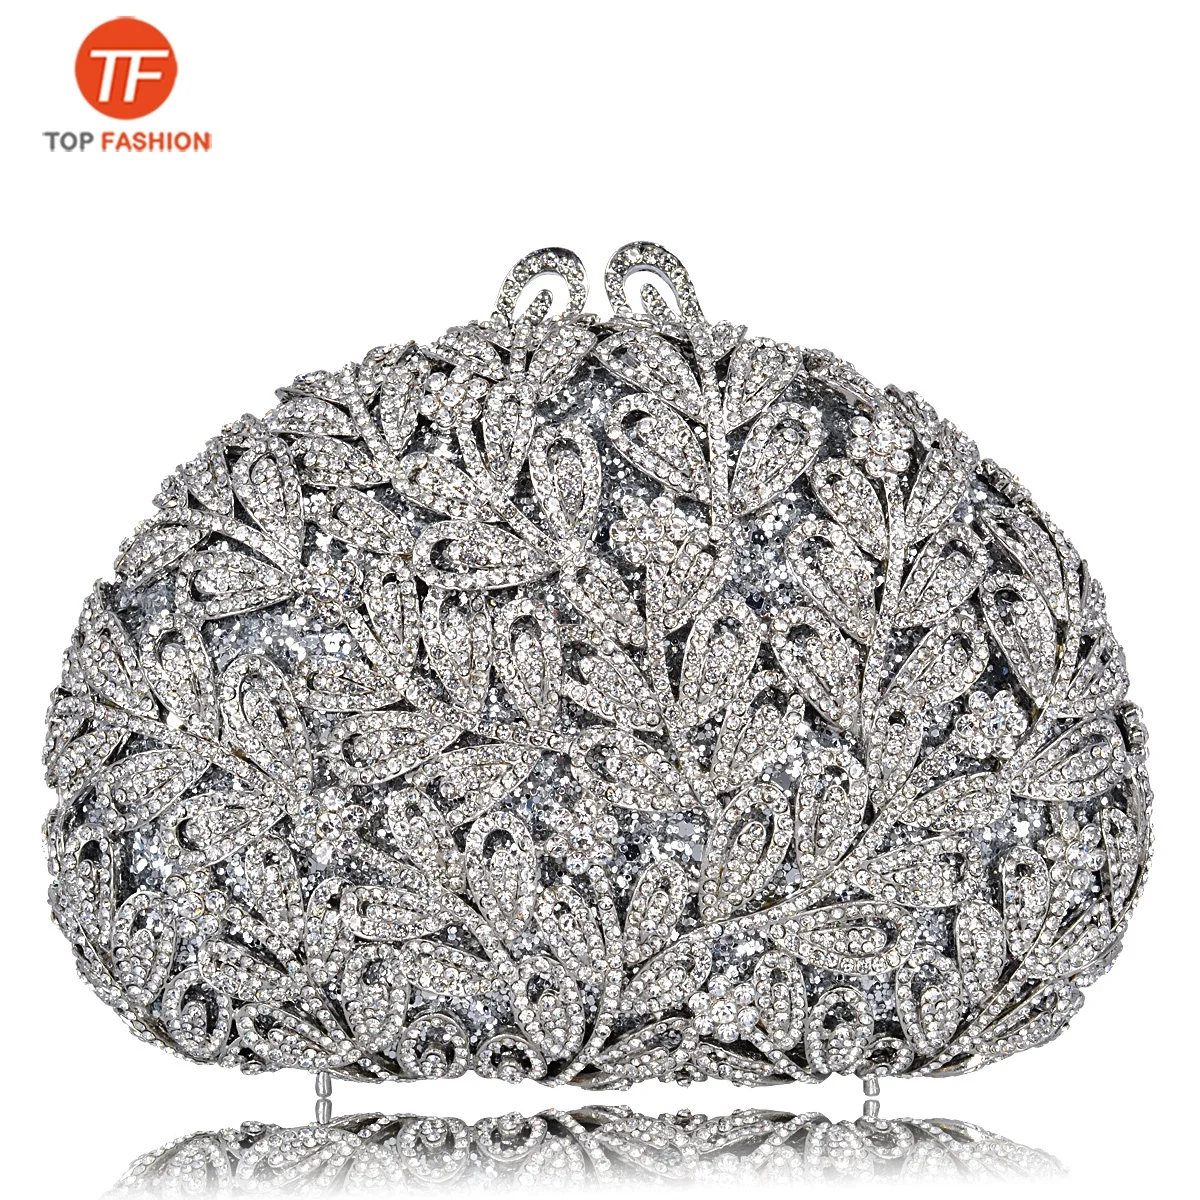 

Sparkle Silver Crystal Rhinestone Clutch Purse Florals Evening Bag for Wedding Bride Wholesales from China Supplier, Silver ( accept customized )